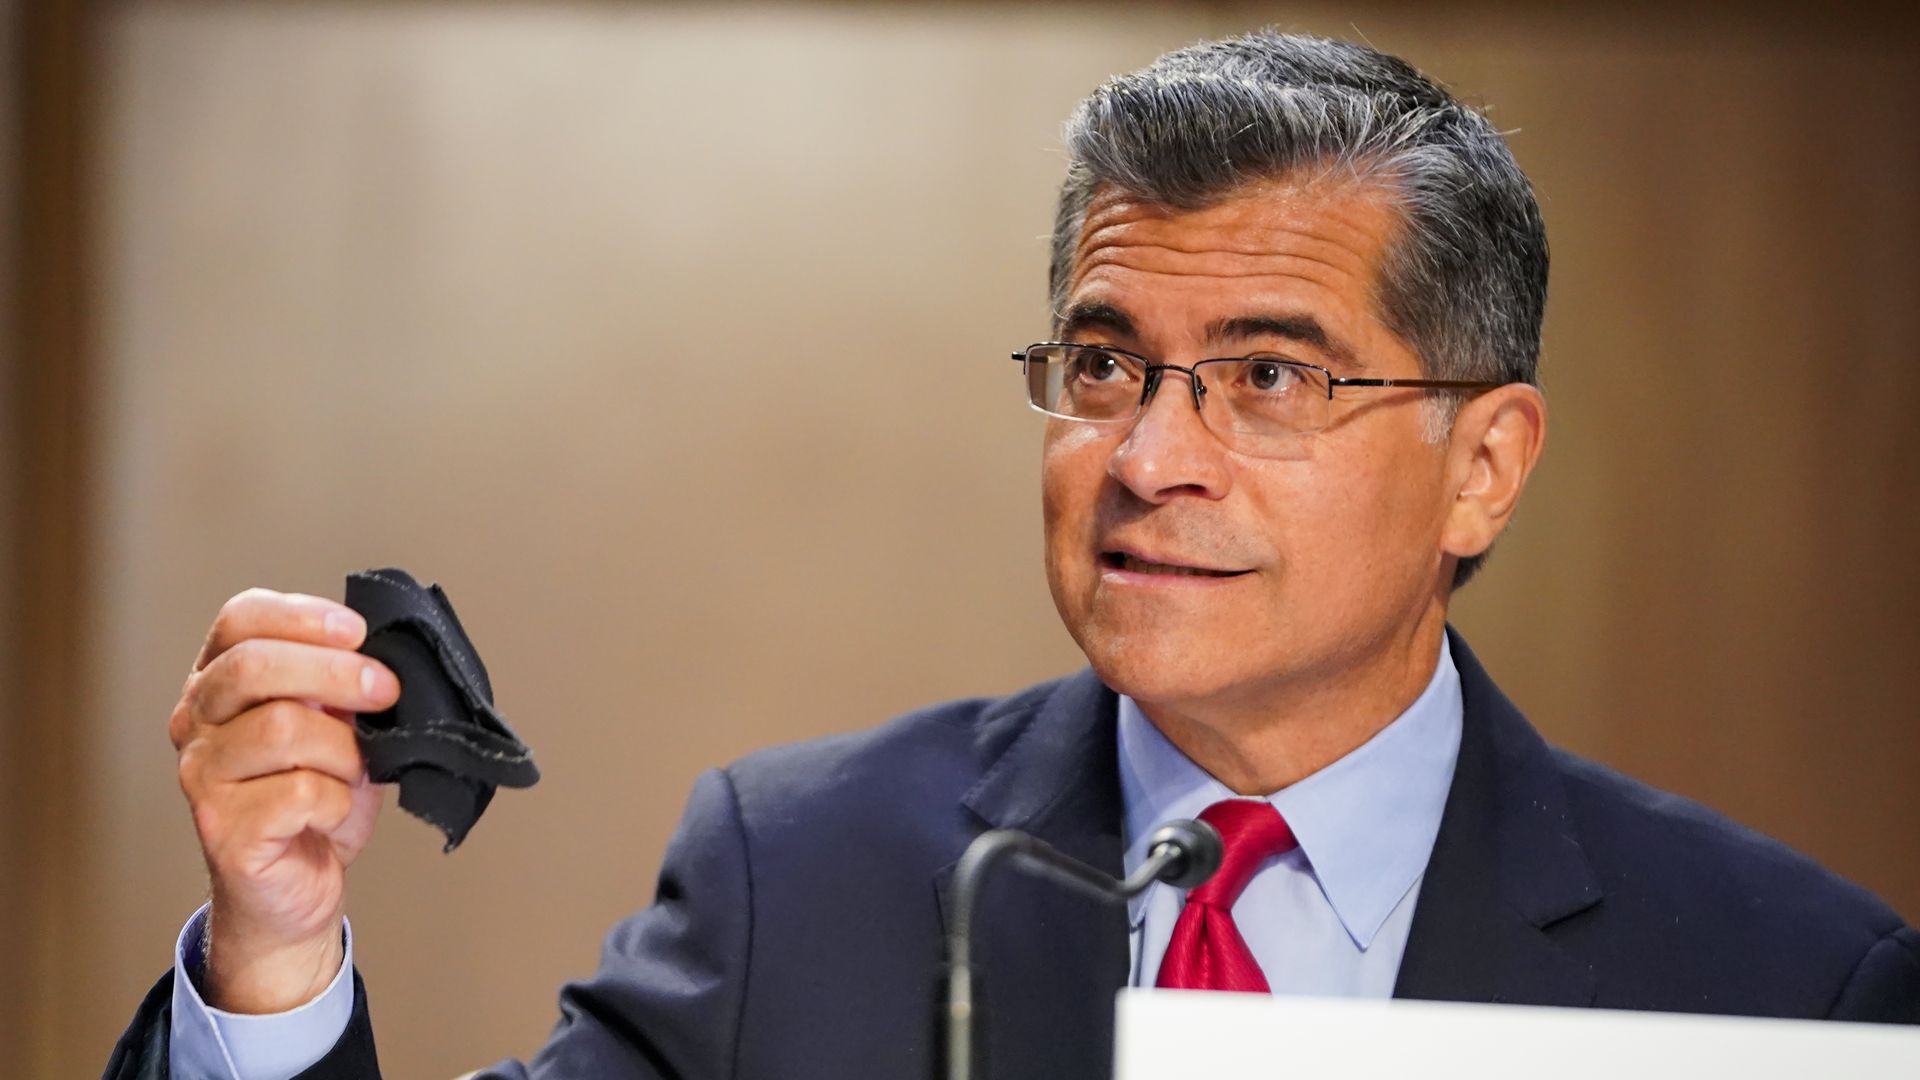 Secretary of Health and Human Services Xavier Becerra holds a mask up during a Senate Health, Education, Labor, and Pensions Committee hearing.